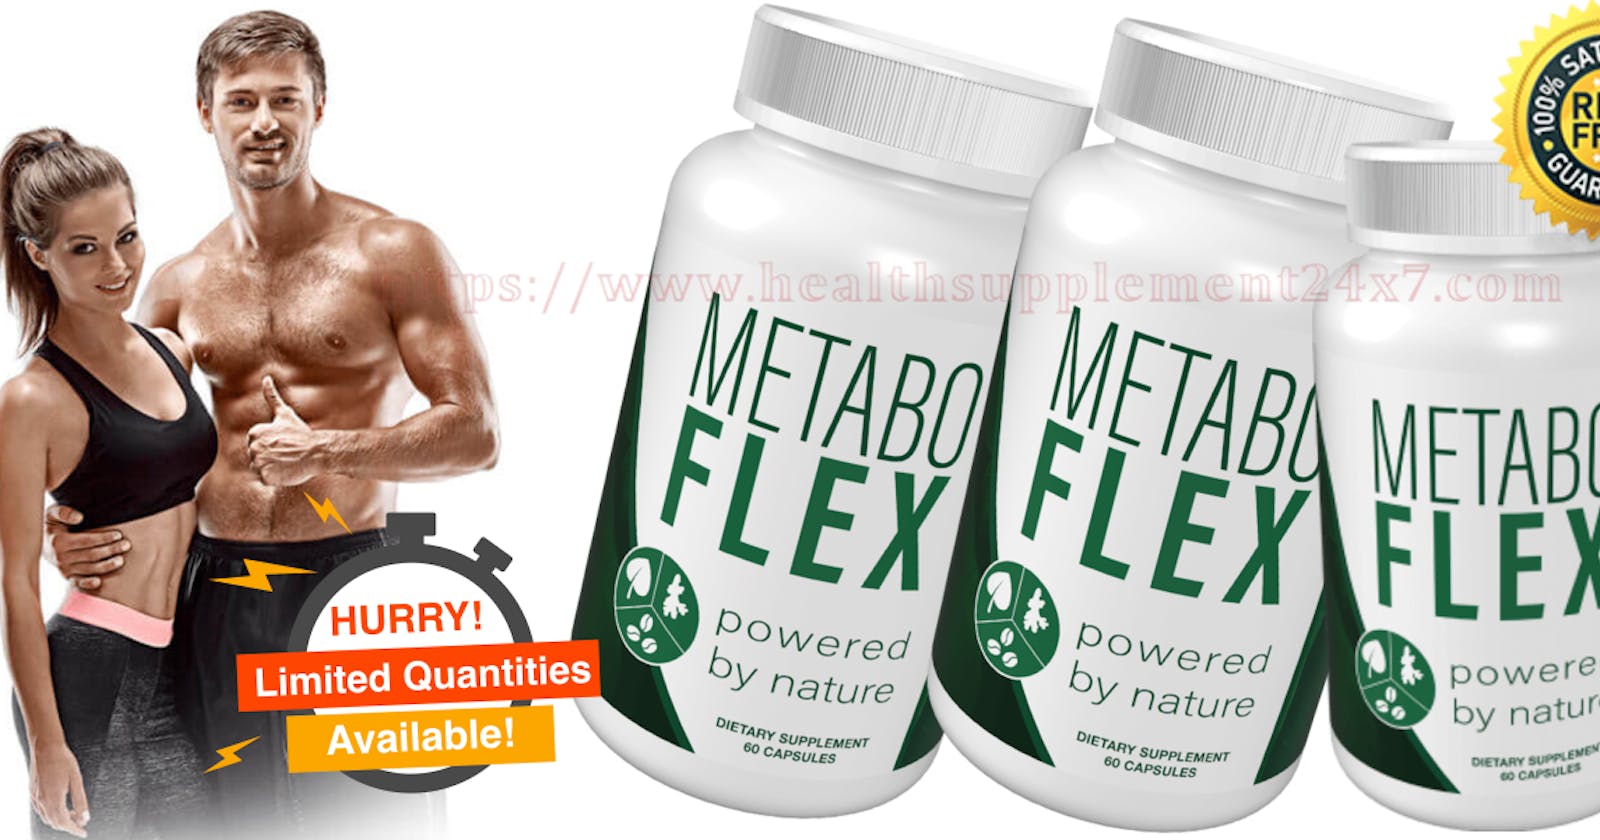 Metabo Flex To Accelerate Metabolism Healthy Weight Loss, Increase Energy And Maintain Overall Body(REAL OR HOAX)